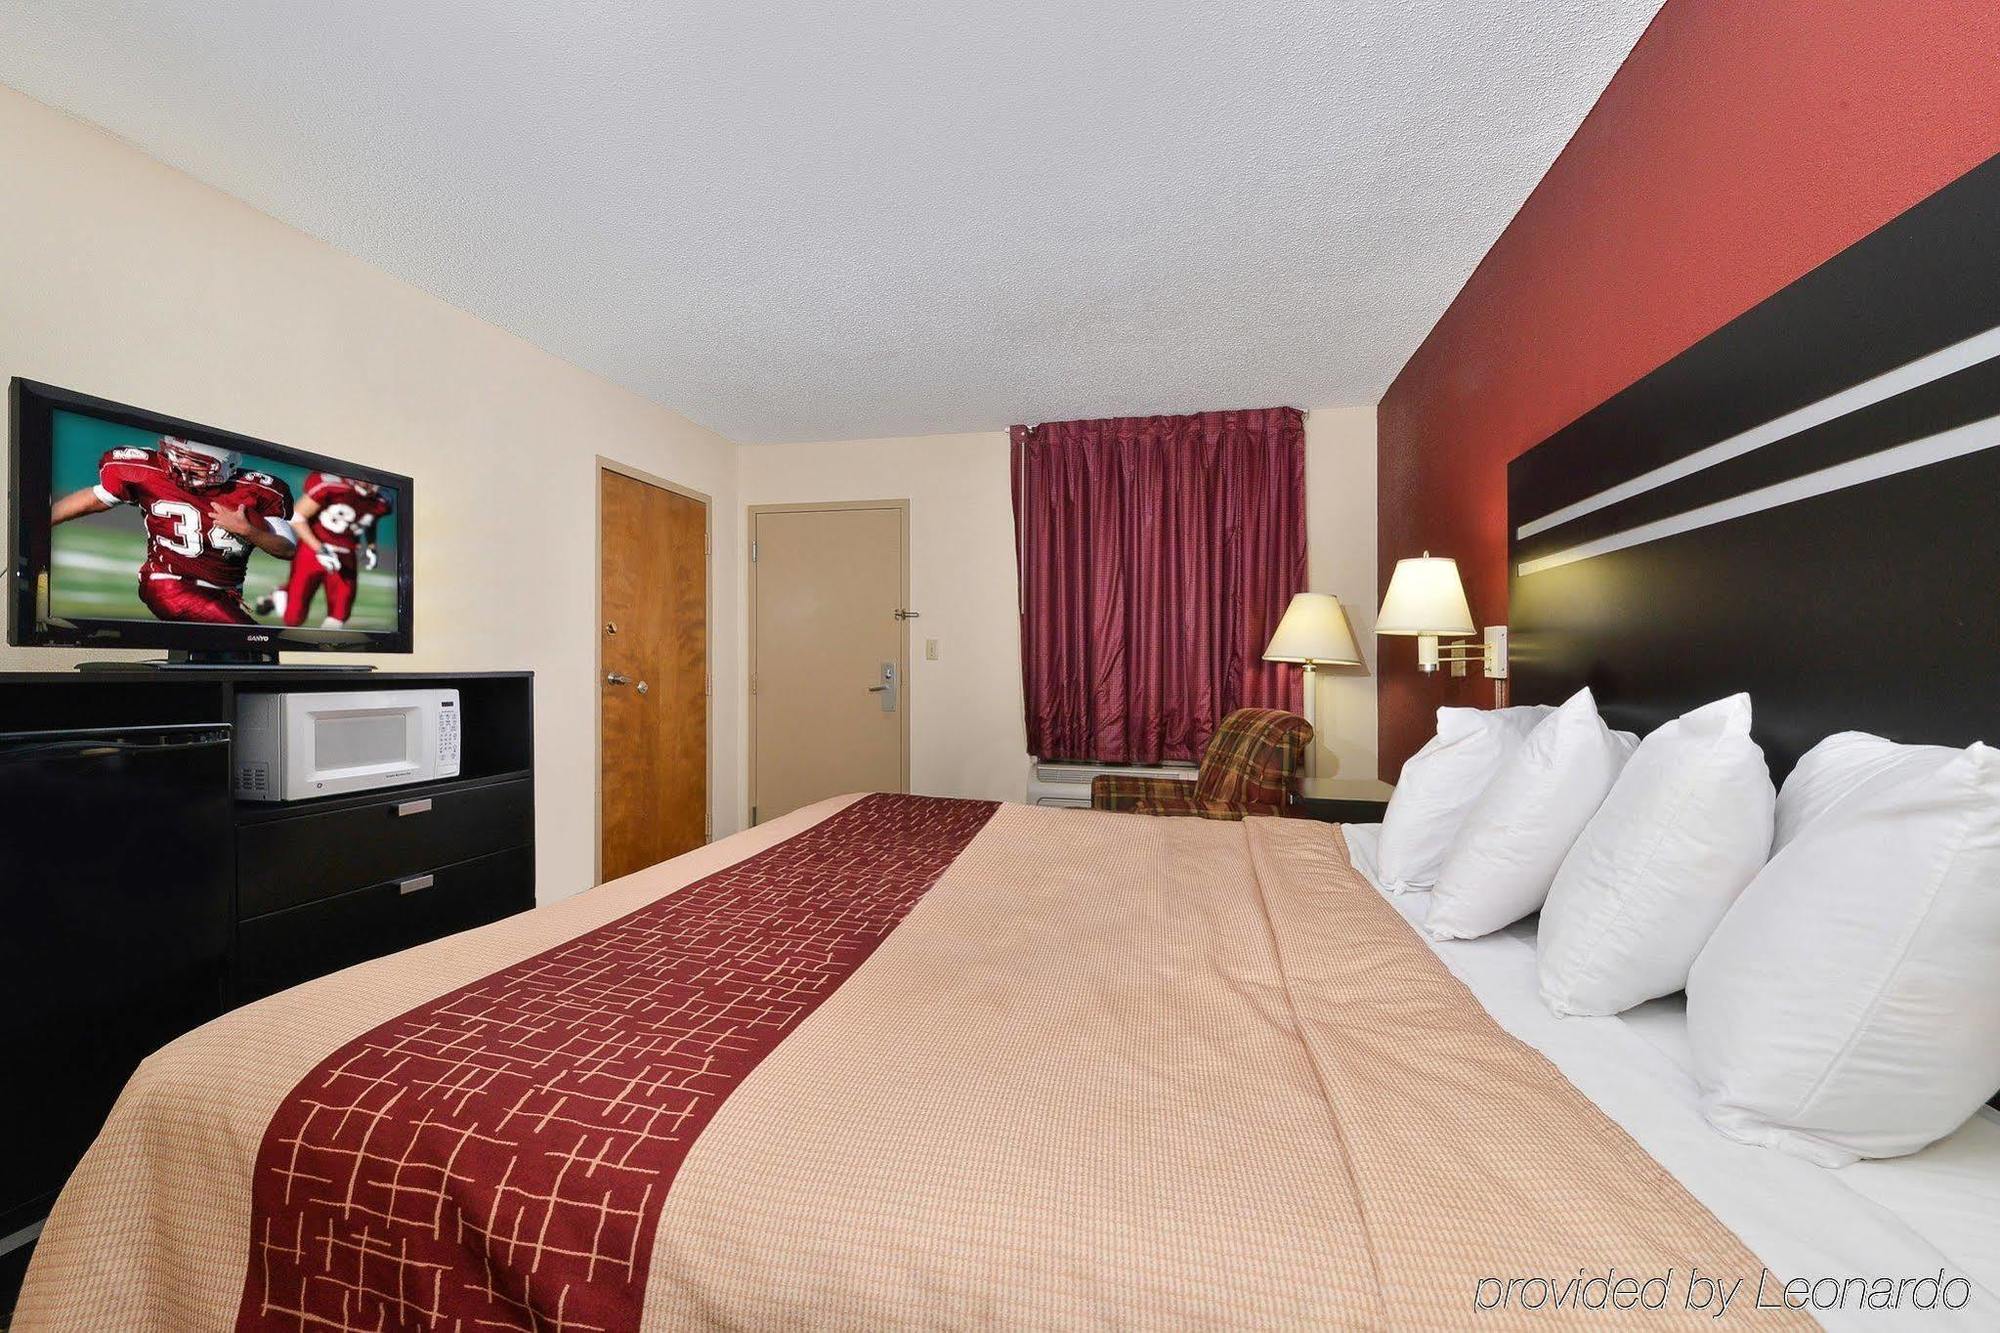 Red Roof Inn Cartersville-Emerson-Lakepoint North Экстерьер фото